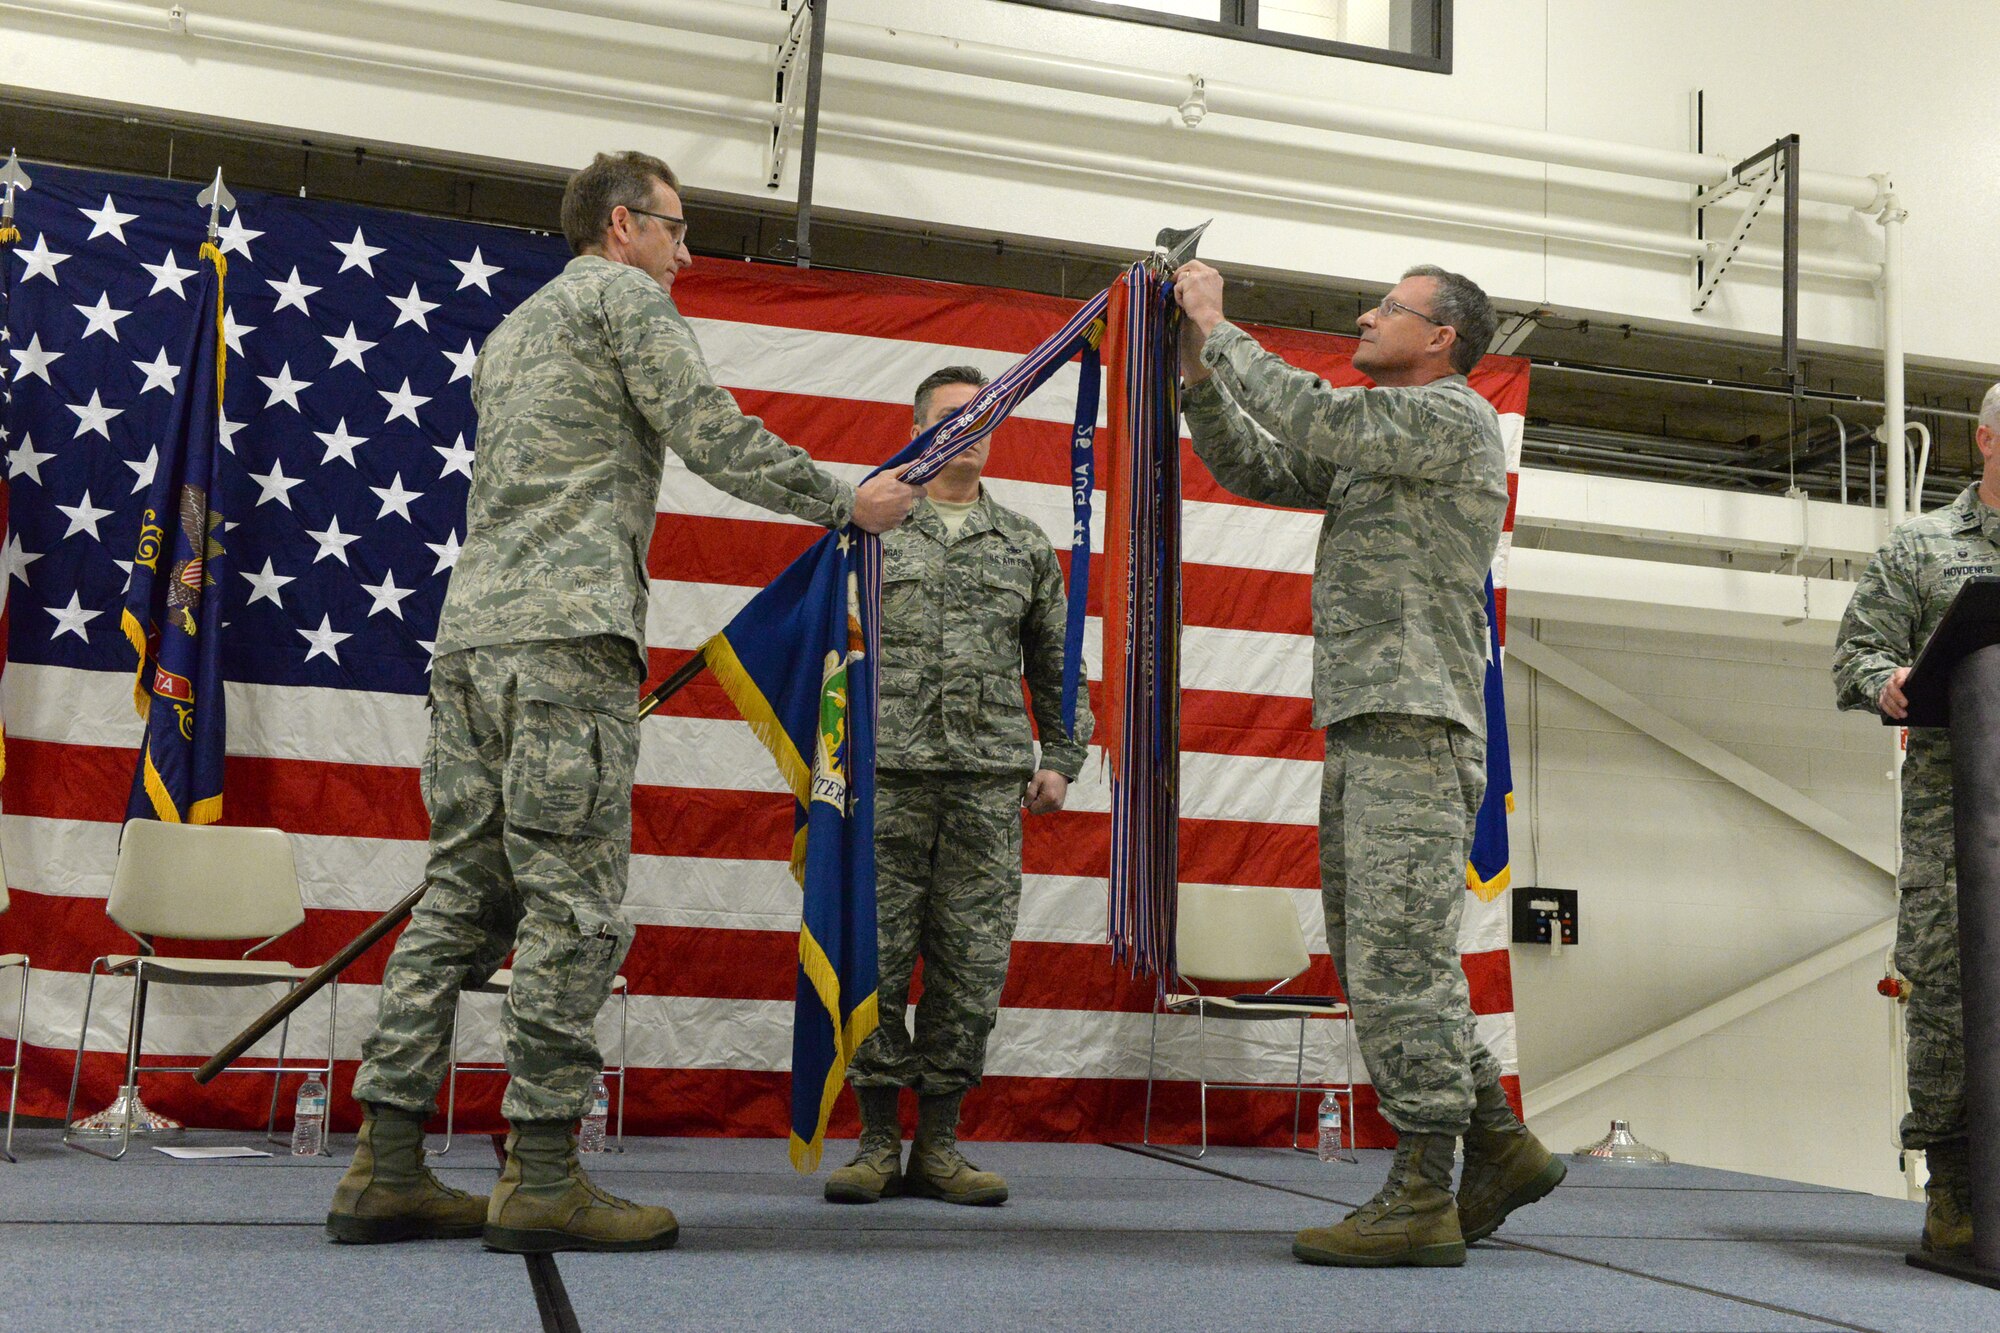 Brig. Gen. Robert Becklund, the North Dakota deputy adjutant general, right, attaches a streamer, representing the Air Force Outstanding Unit Award, onto the 119th Wing guidon, as Col. Kent Olson, the 119th Wing commander, lowers the unit flag during a recognition ceremony at the as Chief Master Sgt. Duane Kangas, the 119th Wing command chief master sergeant, center, looks on at the North Dakota Air National Guard Base, Fargo, North Dakota, Dec. 3, 2016. (U.S. Air National Guard photo by Senior Master Sgt. David H. Lipp/Released)